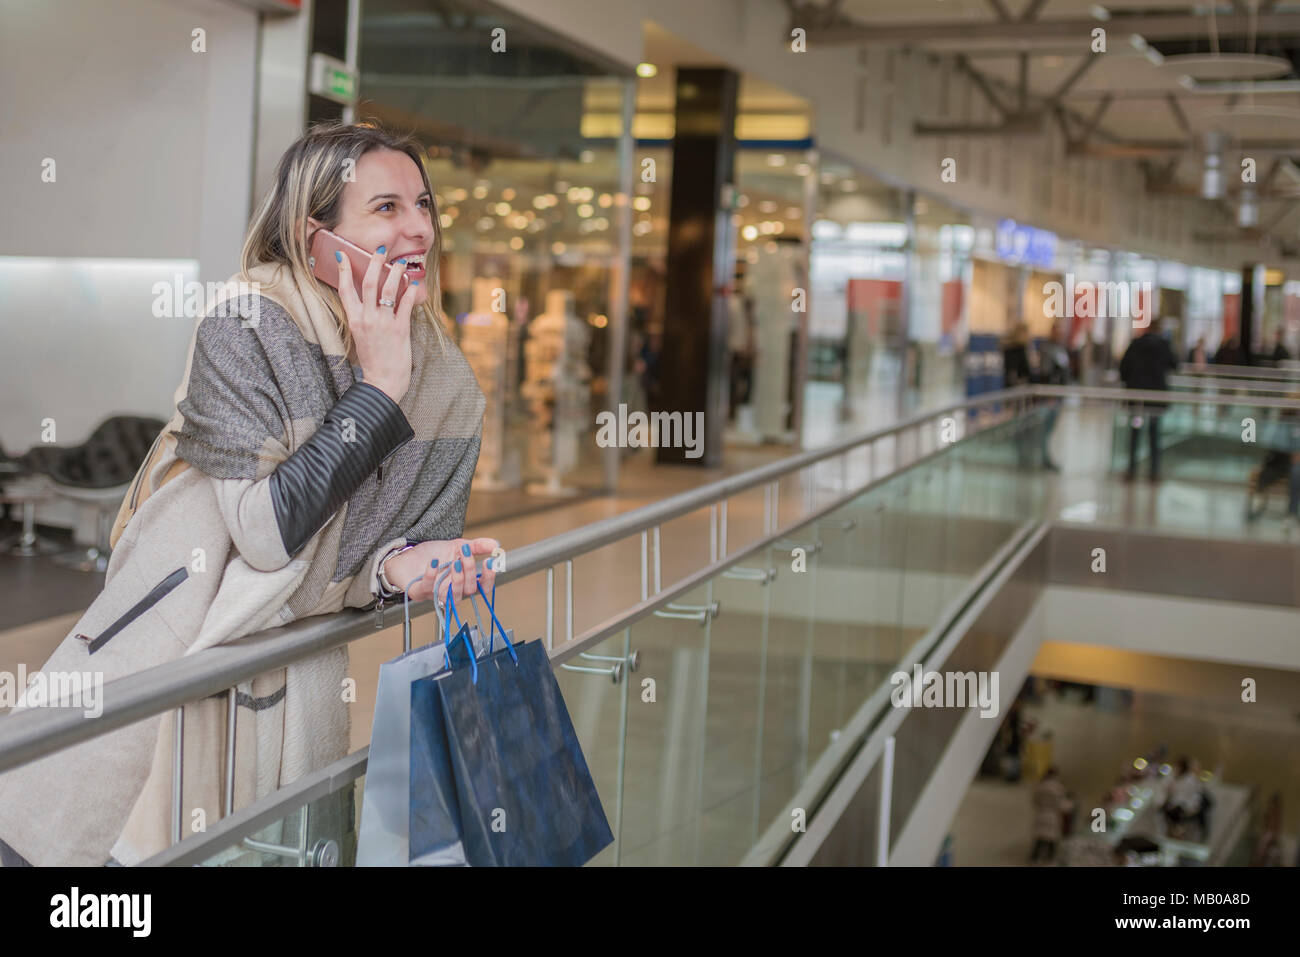 Smiling girl talking on her mobile phone in shopping mall while holding shopping bags. Fashion Shopping Girl Portrait. Beauty Woman with Shopping Bags Stock Photo